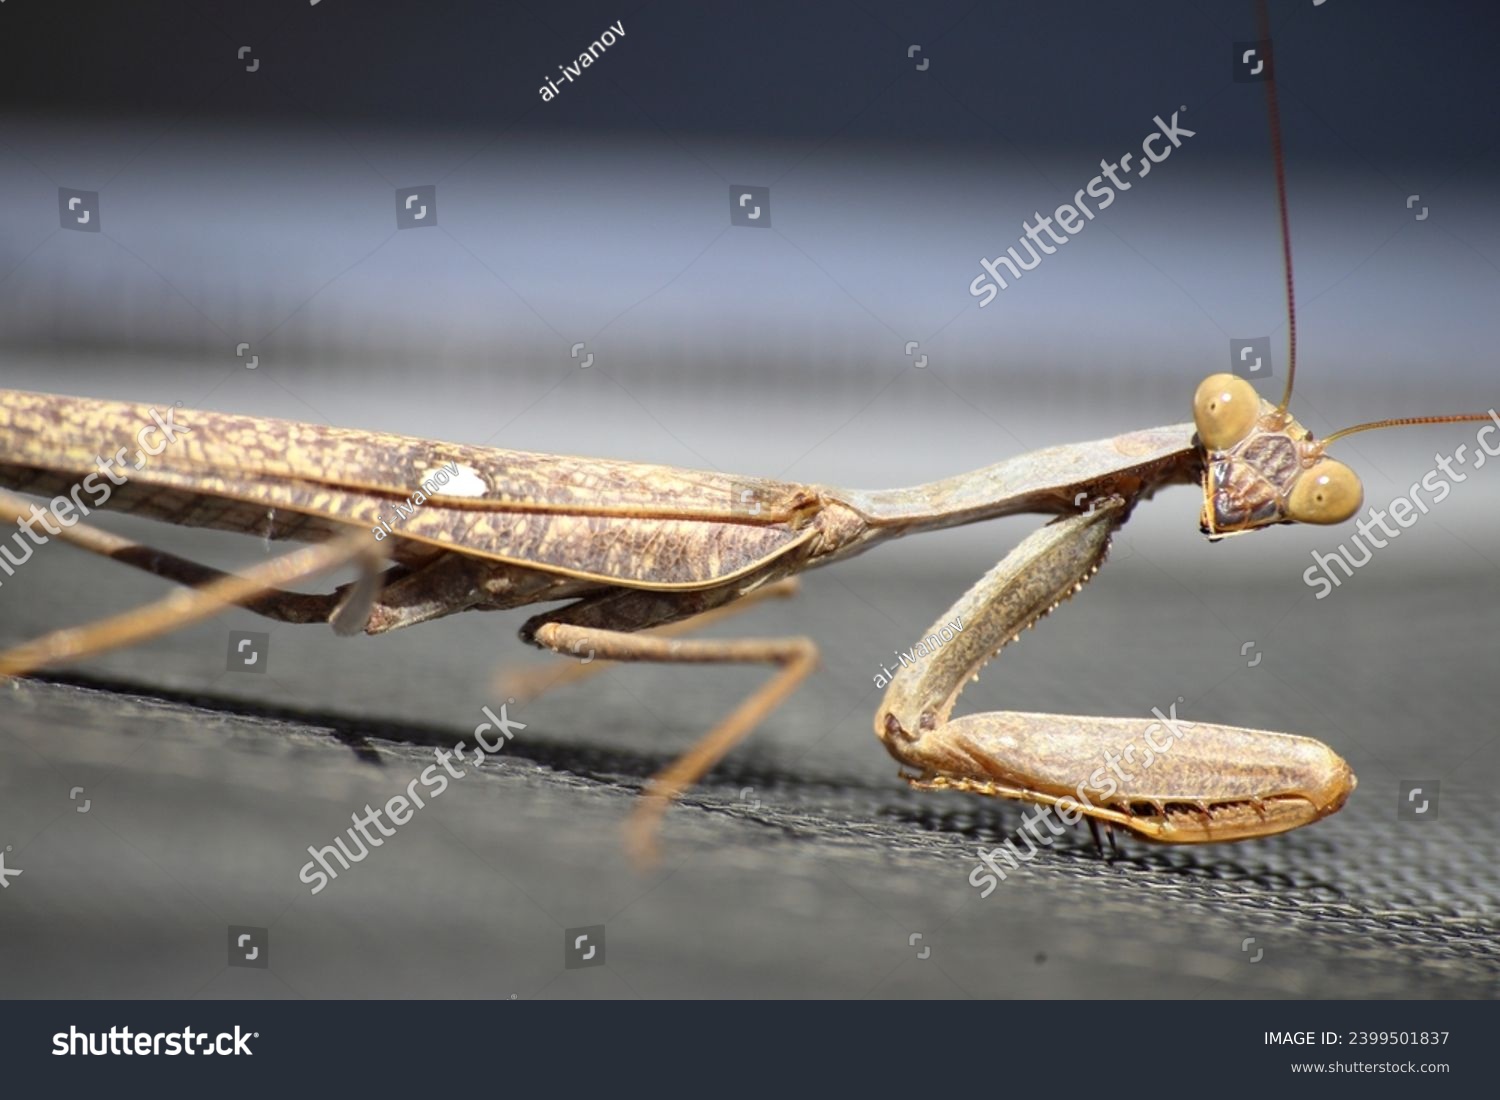 The close-up view of a European mantis (Mantis religiosa) with brown coloration and white spots on the wings (Israel, Netanya) #2399501837